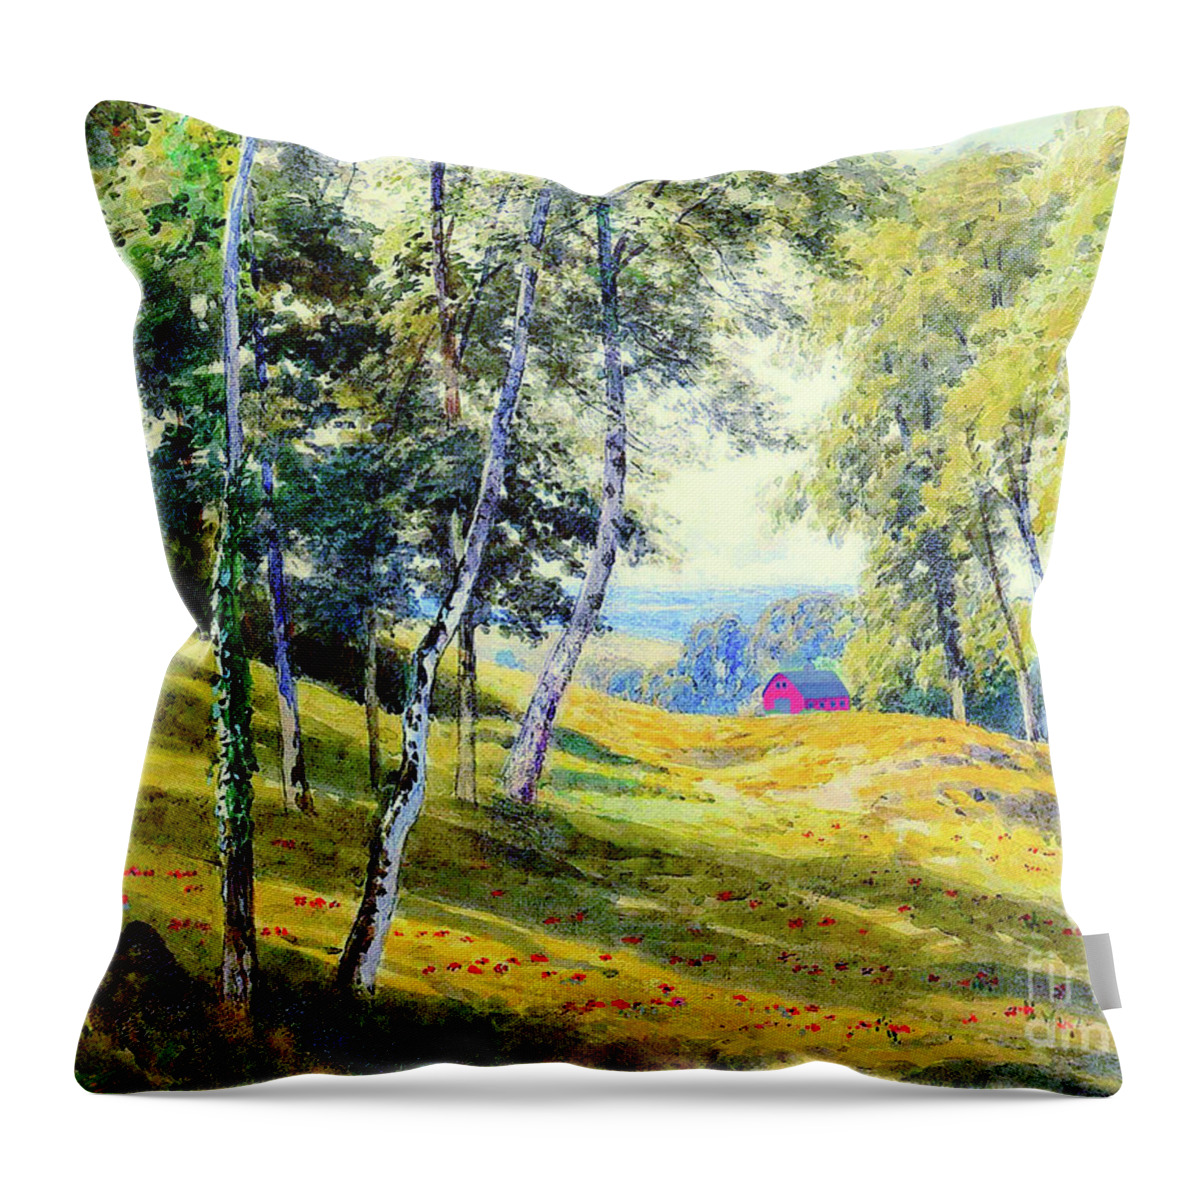 Landscape Throw Pillow featuring the painting A Joy Filled Day by Jane Small